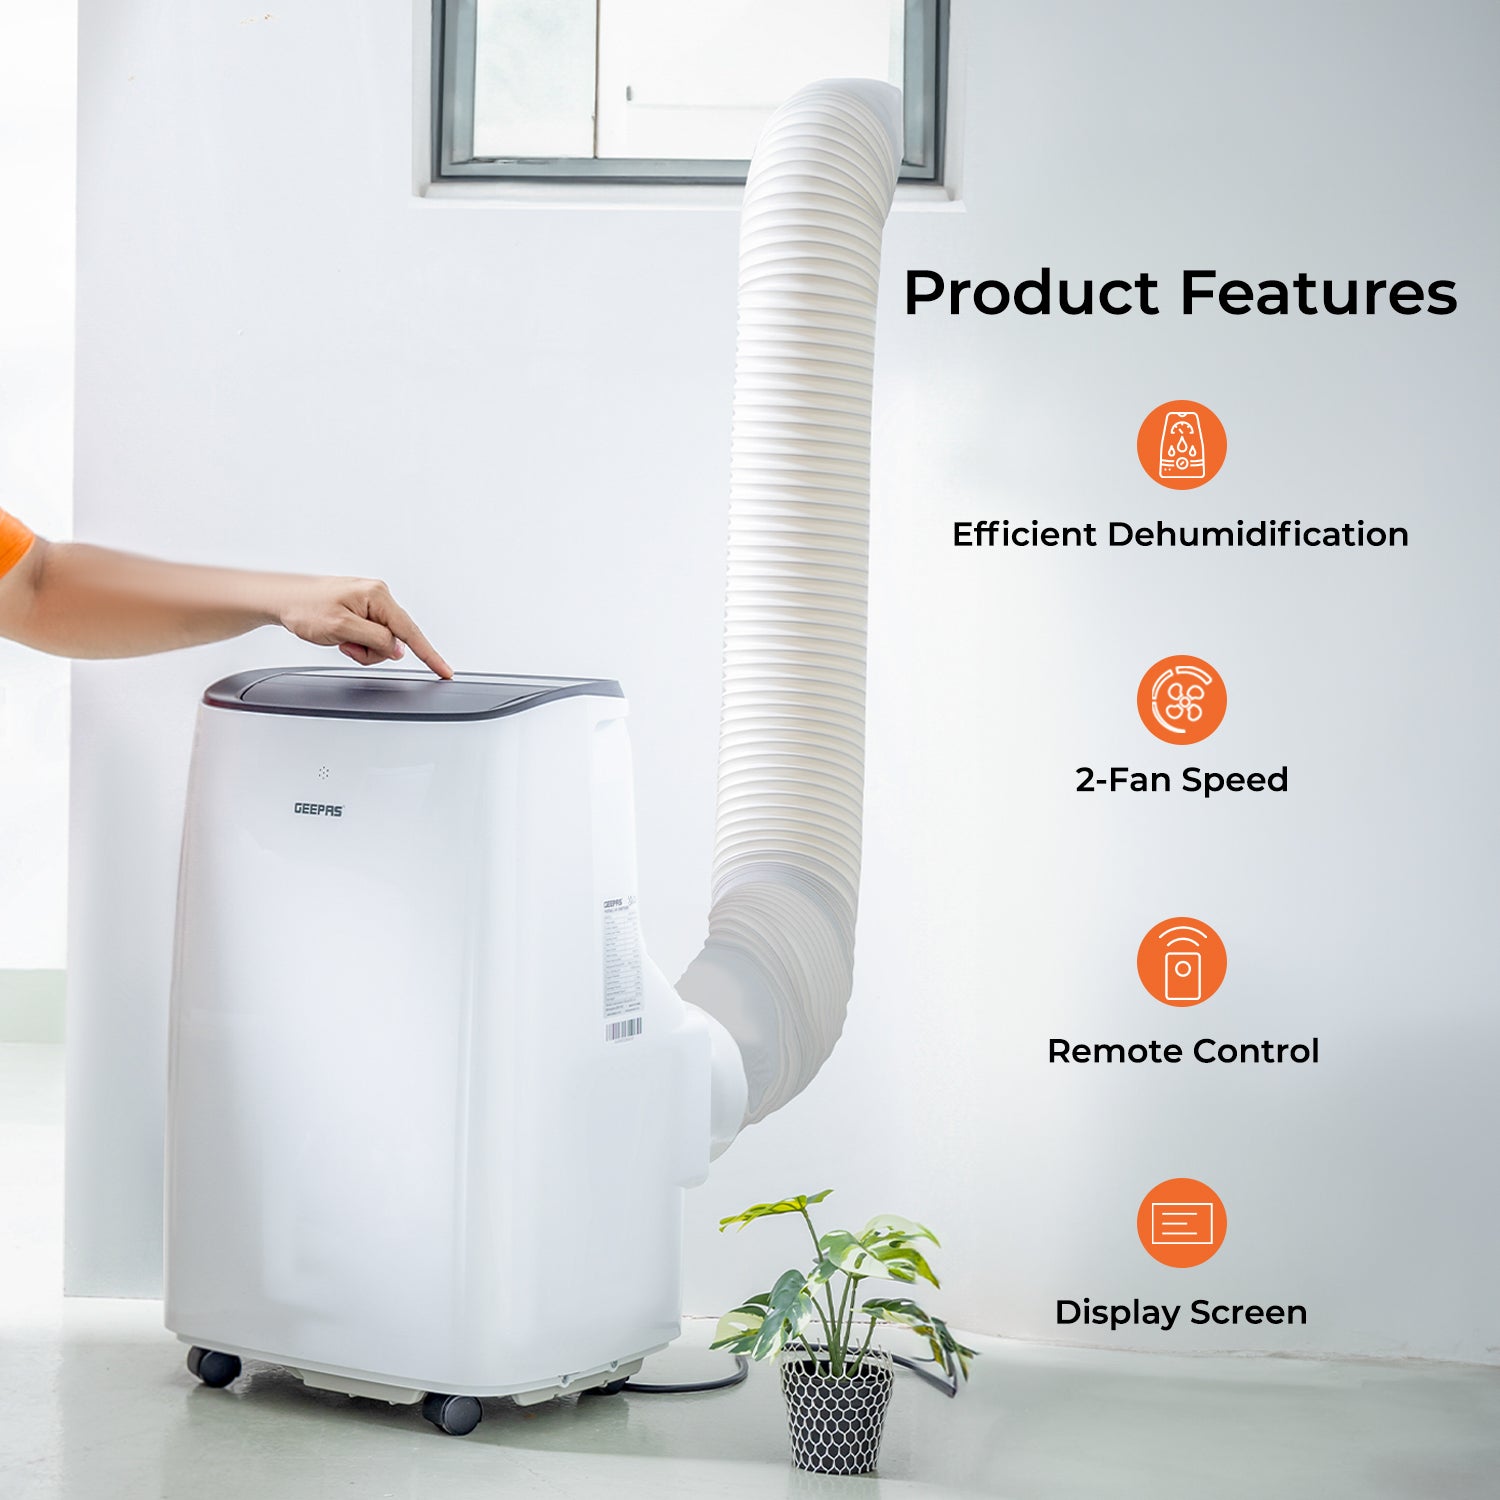 Image shows off the four main features of the small portable air conditioning unit, the air conditioning unit features a dehumidifier, two cooling fan speeds, remote controlled operation and a digital display screen.